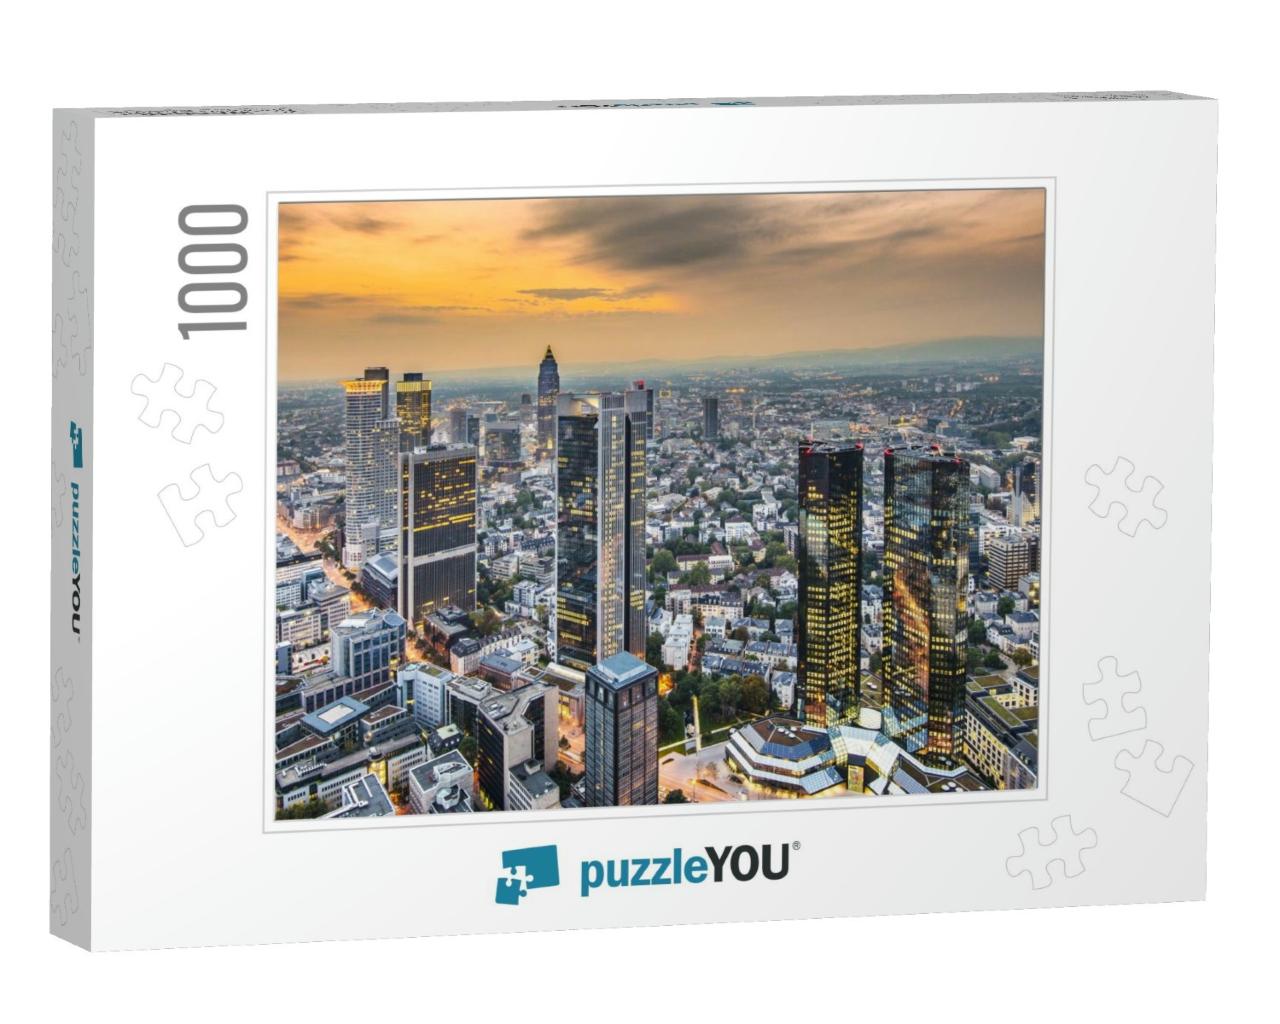 Cityscape of Frankfurt, Germany, the Financial Center of... Jigsaw Puzzle with 1000 pieces